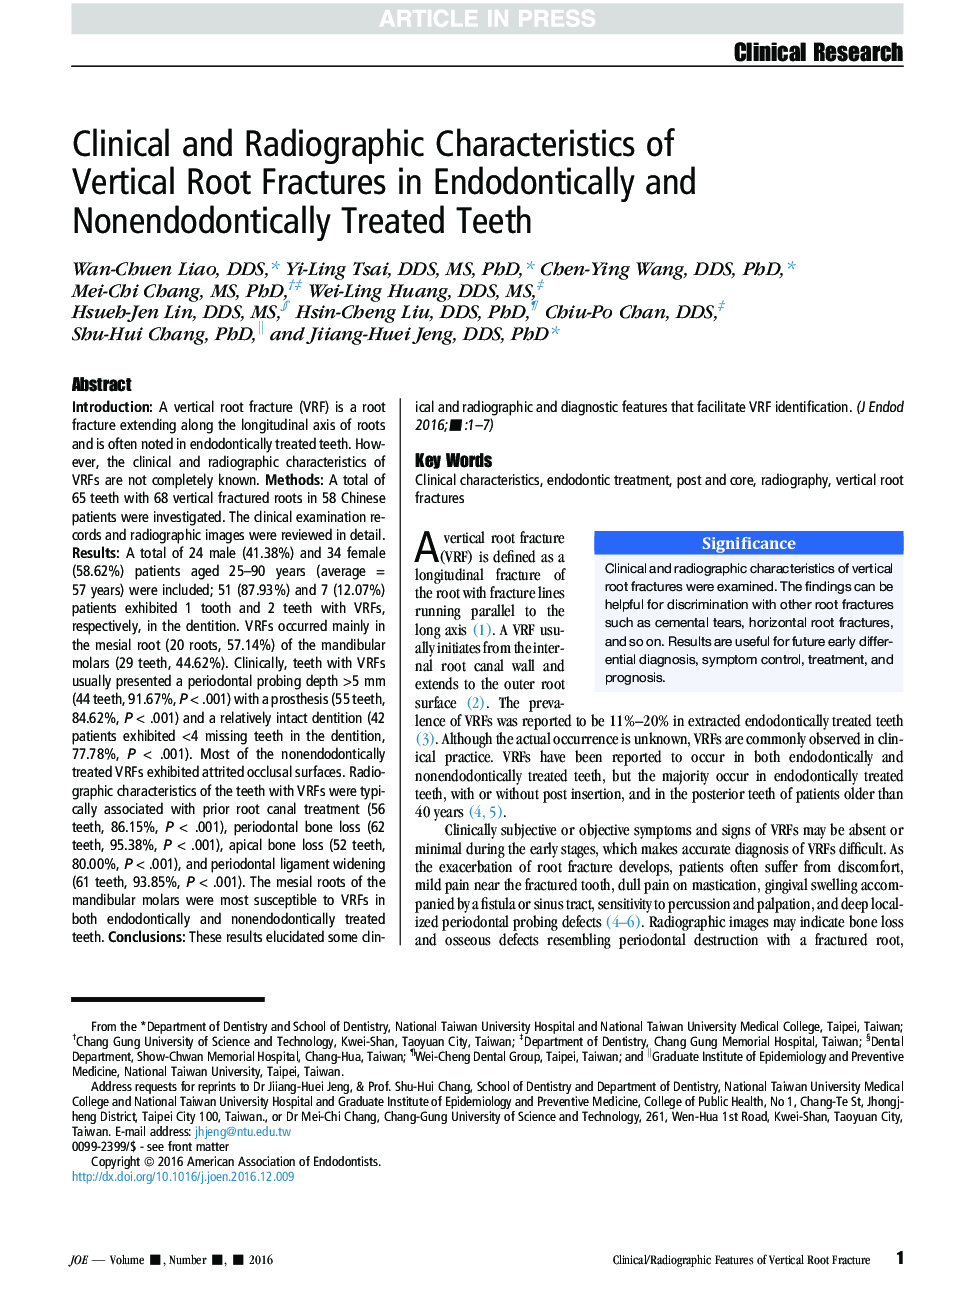 Clinical and Radiographic Characteristics of Vertical Root Fractures in Endodontically and Nonendodontically Treated Teeth